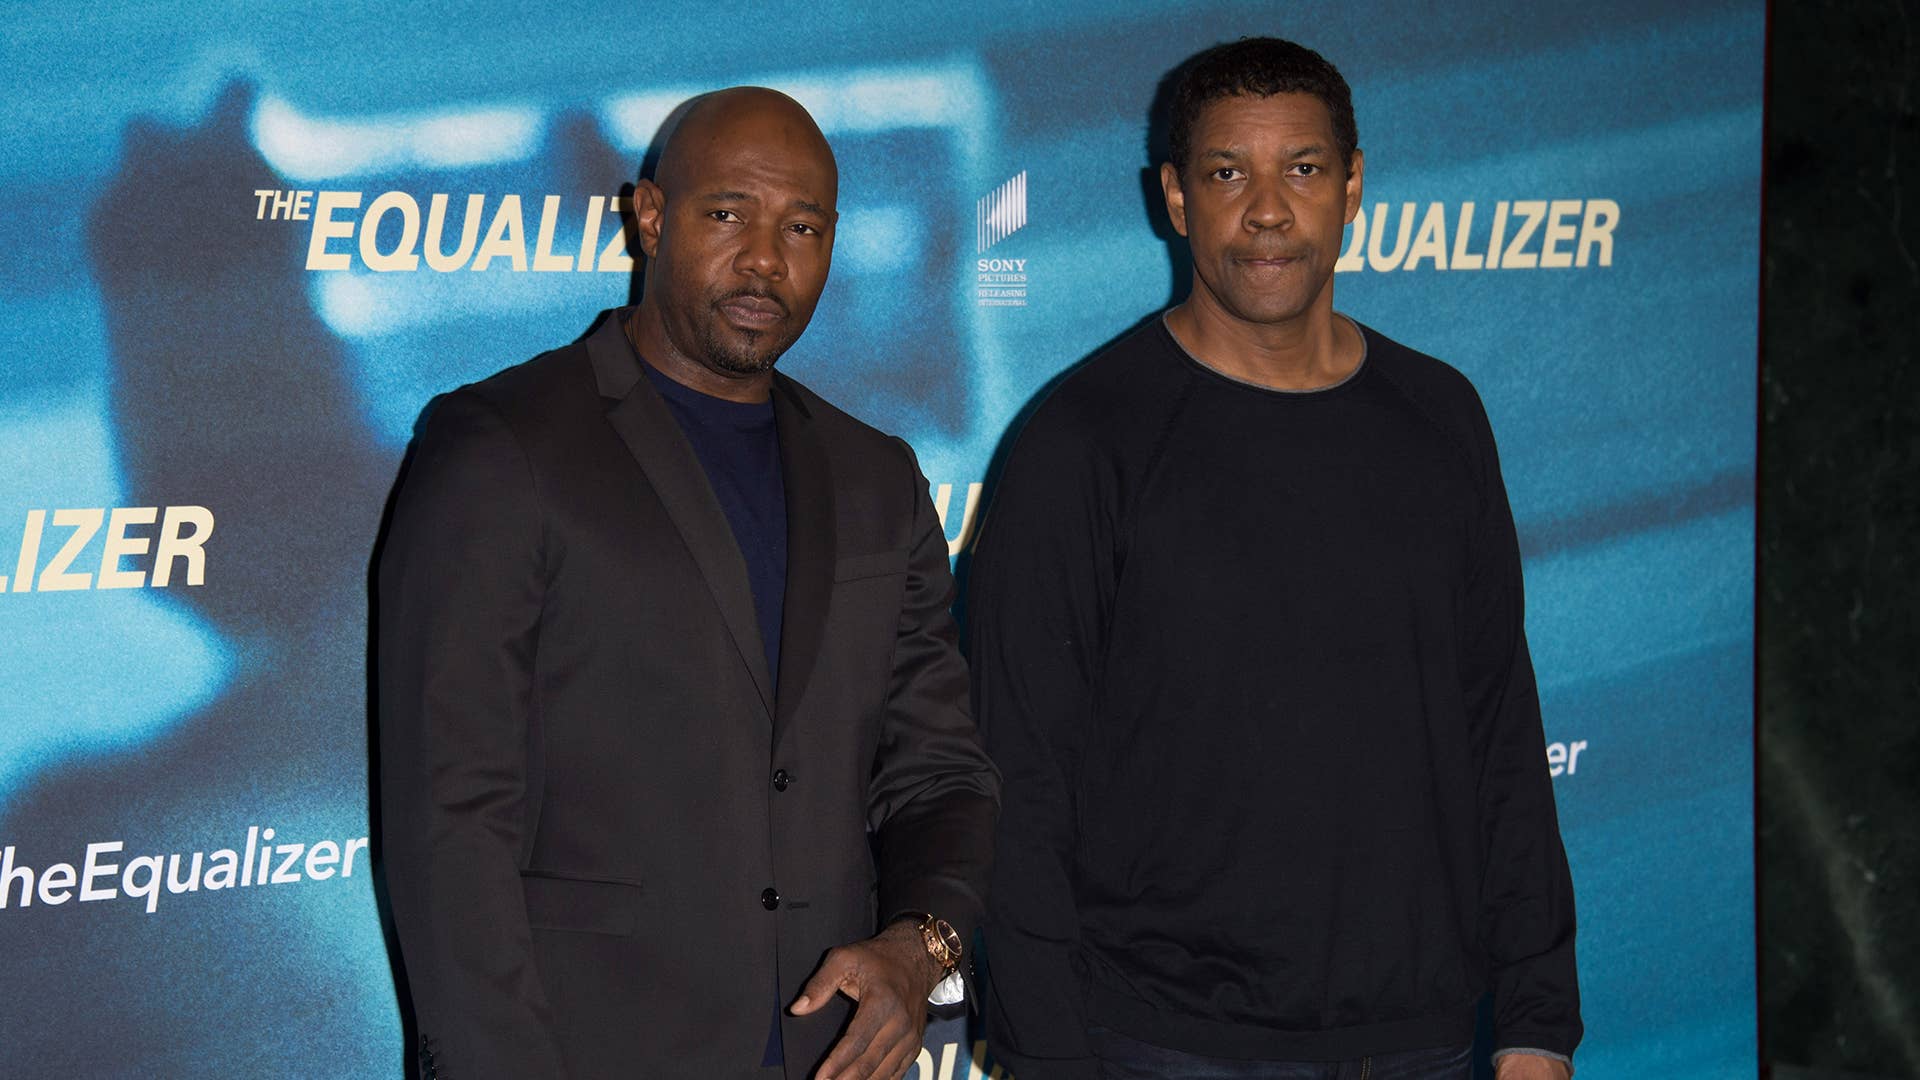 'The Equalizer' director Antoine Fuqua with his lead actor Denzel Washington